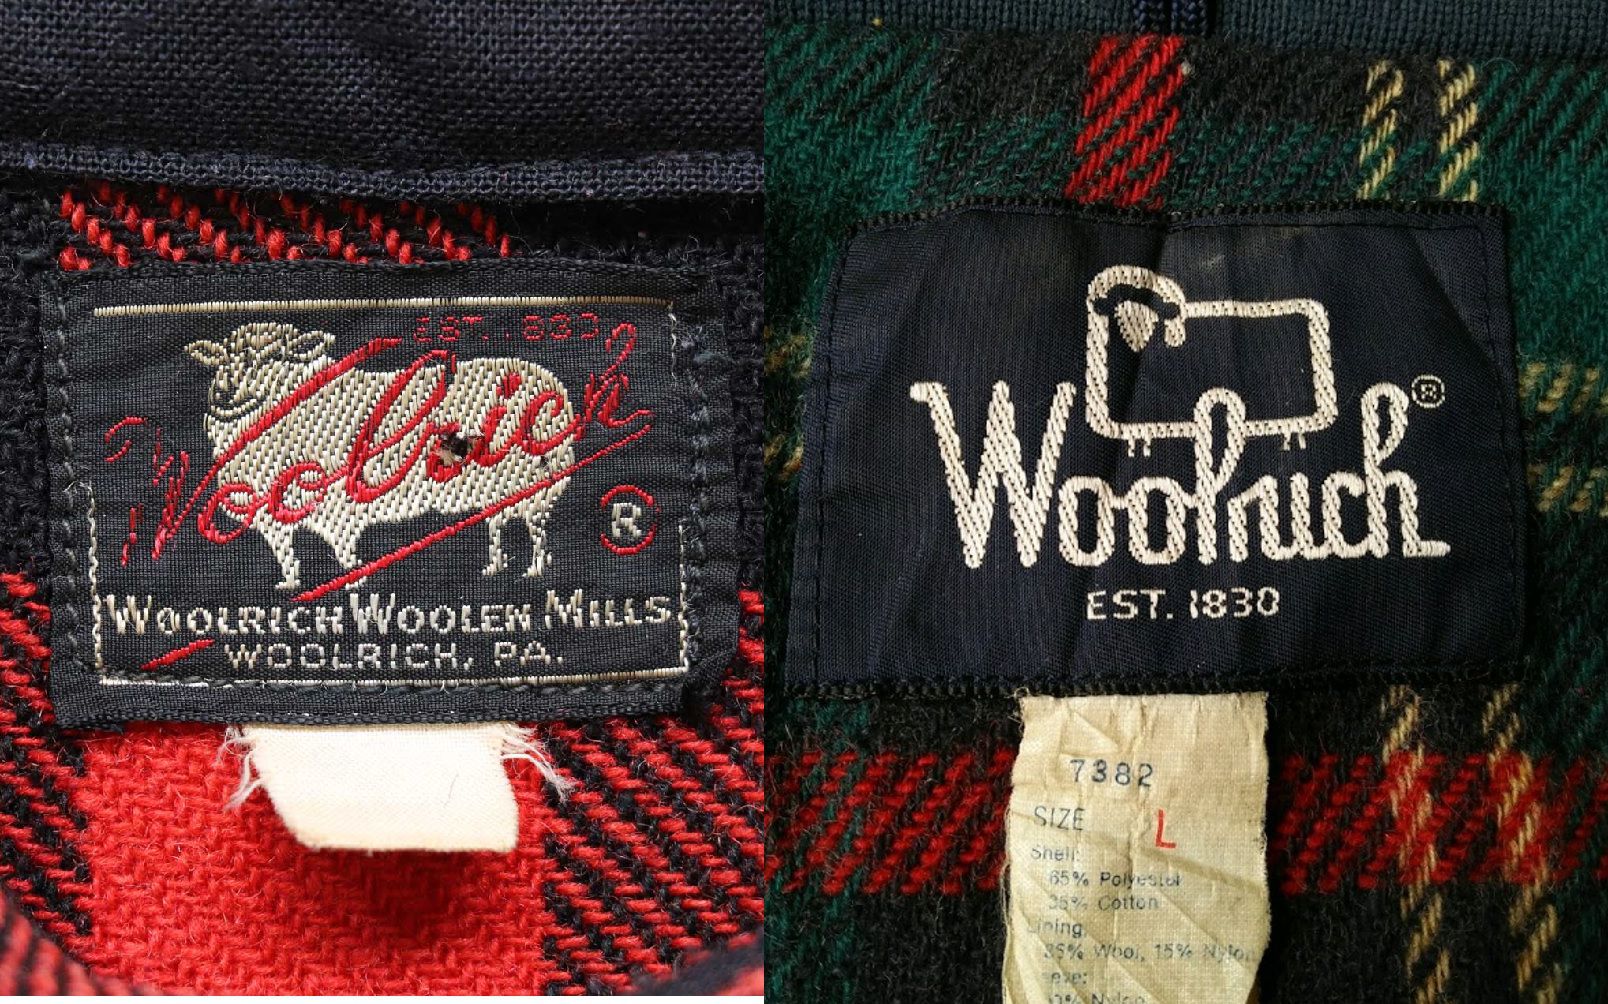 Woolrich Has A New Logo - A Redesign Of The Historic 